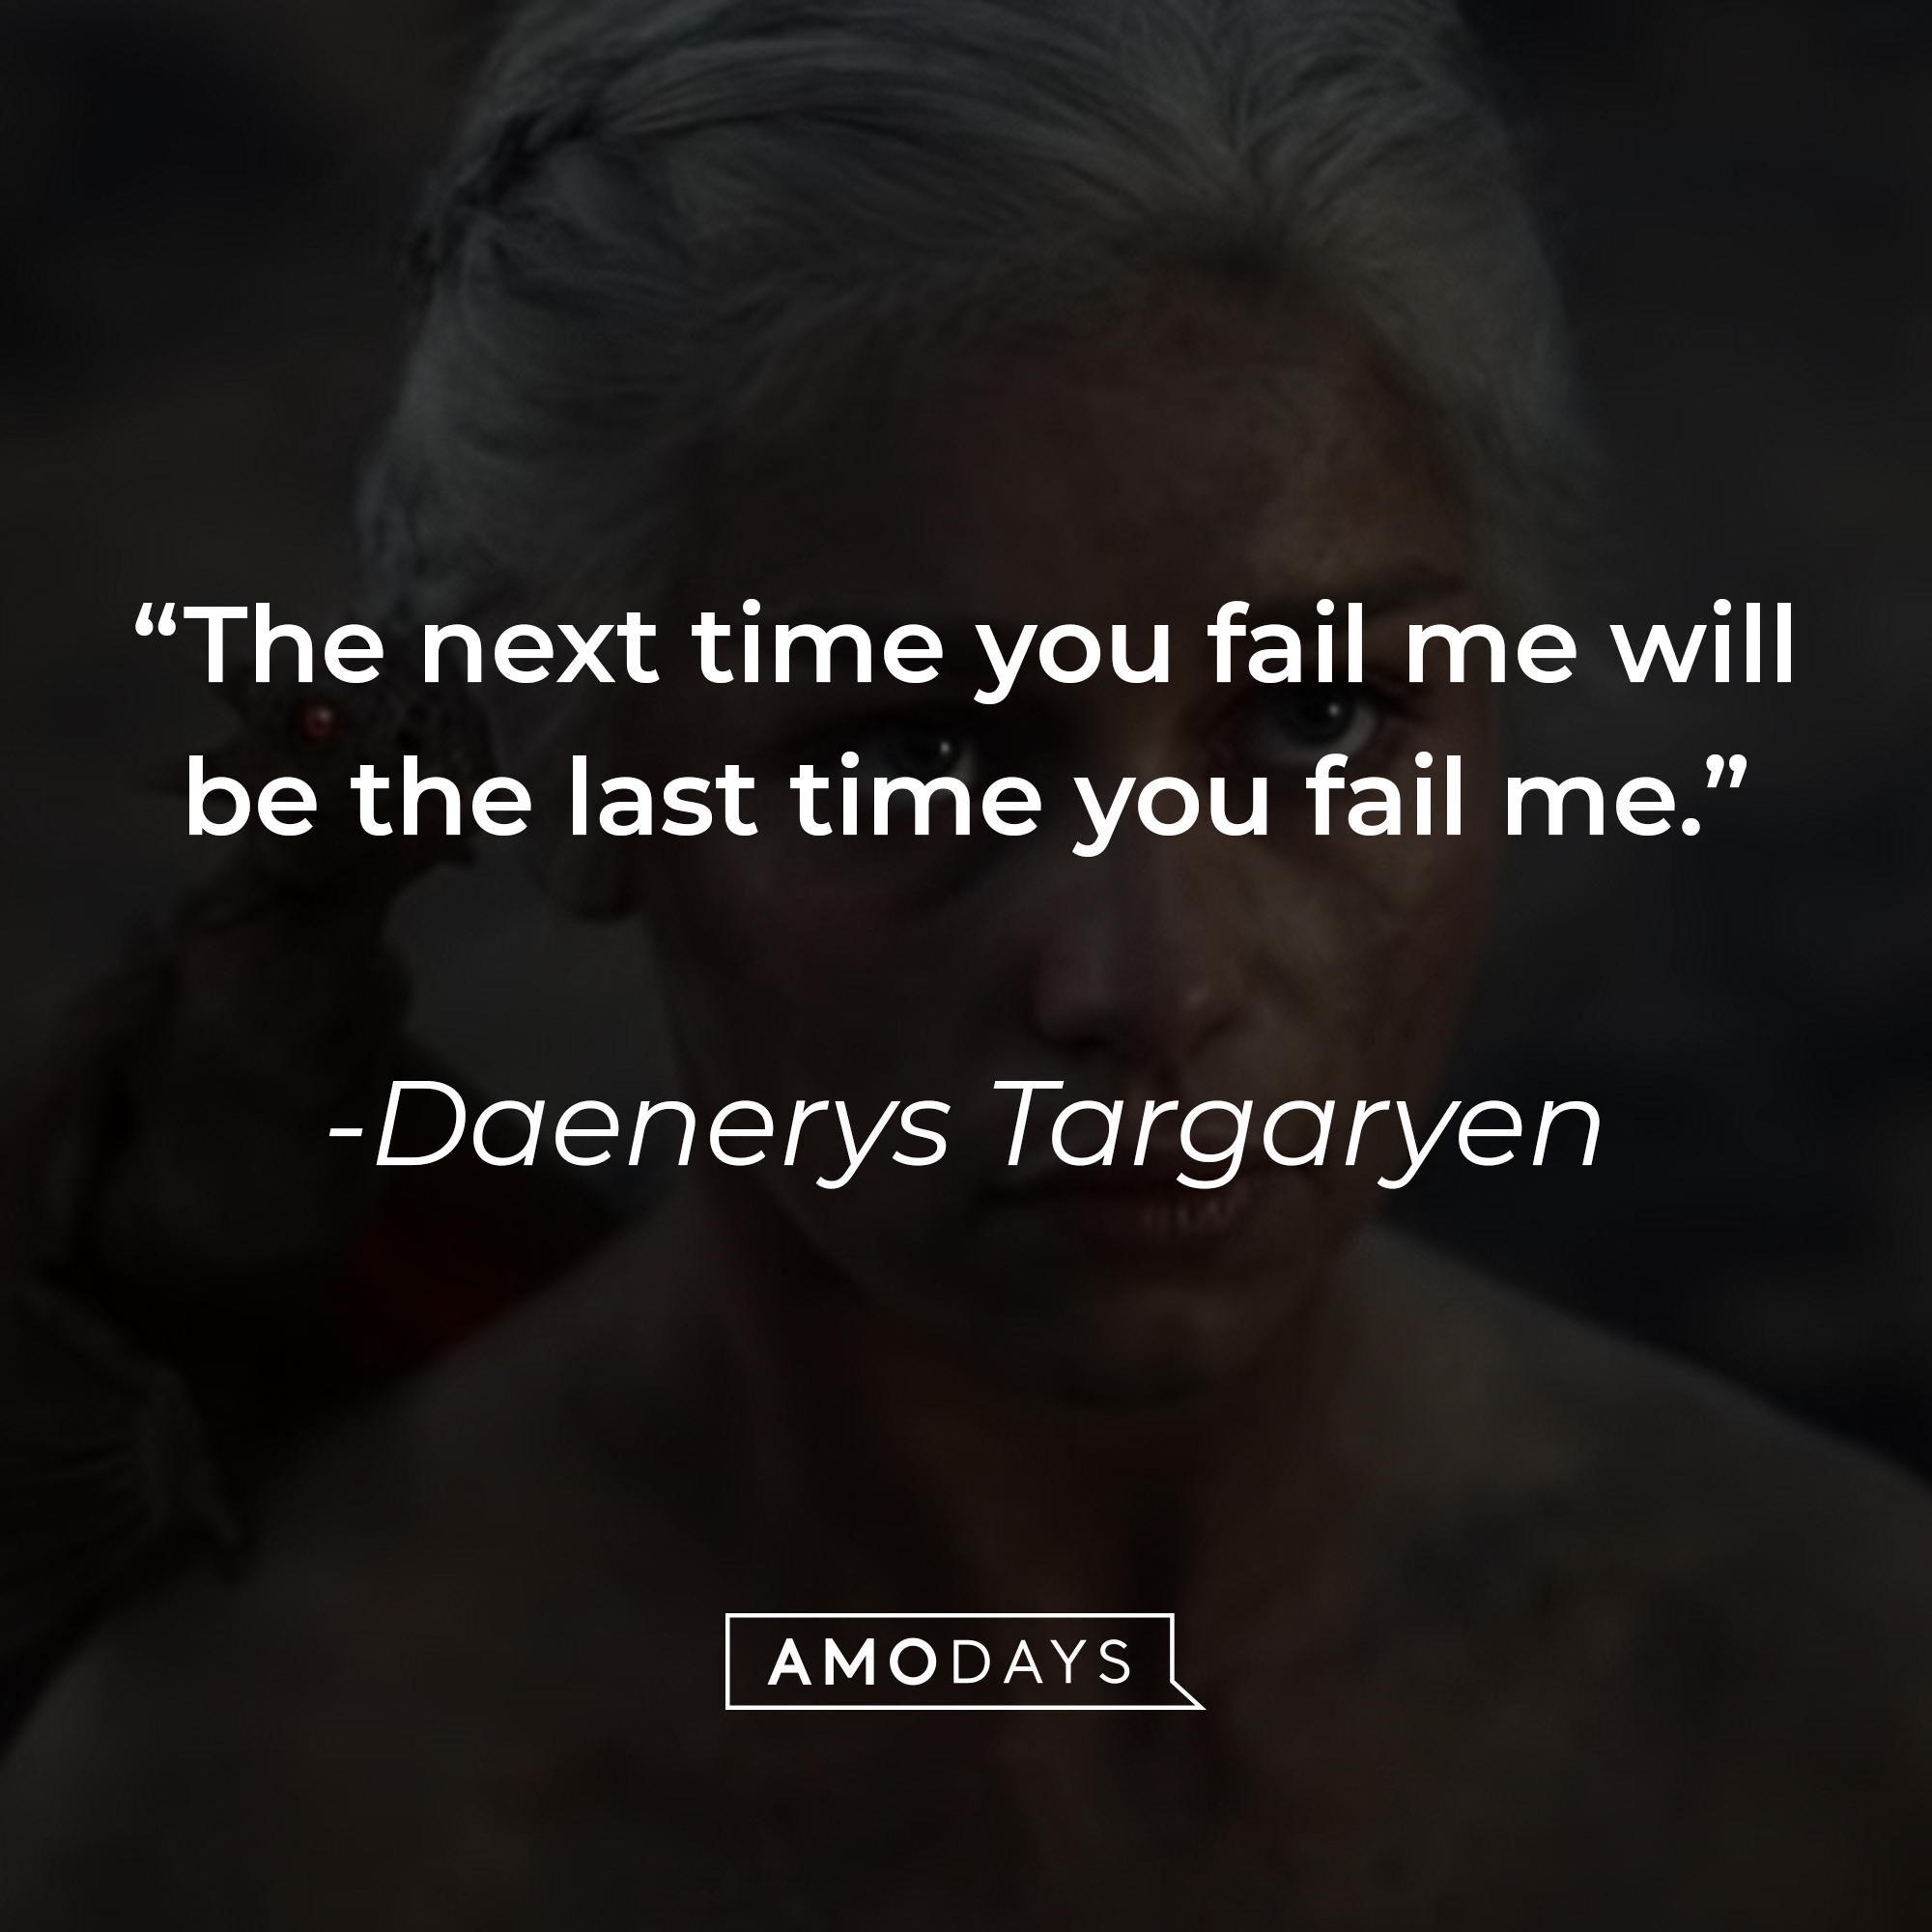 Daenerys Targaryen's quote: "The next time you fail me will be the last time you fail me." | Source: youtube.com/gameofthrones